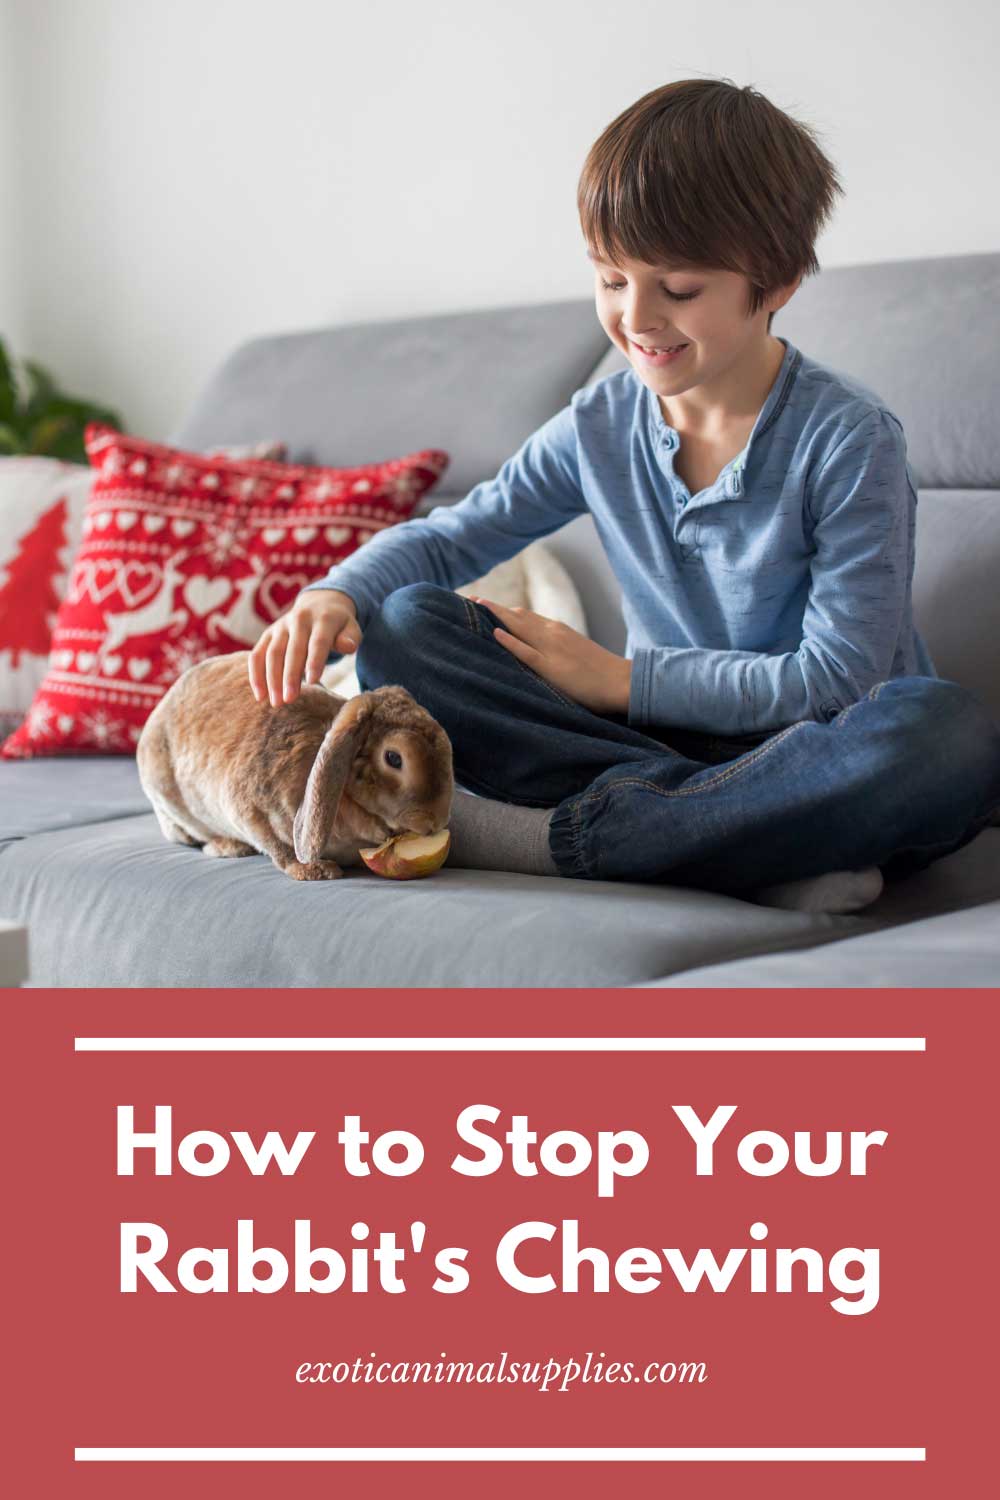 How to Stop Pet Rabbits From Chewing